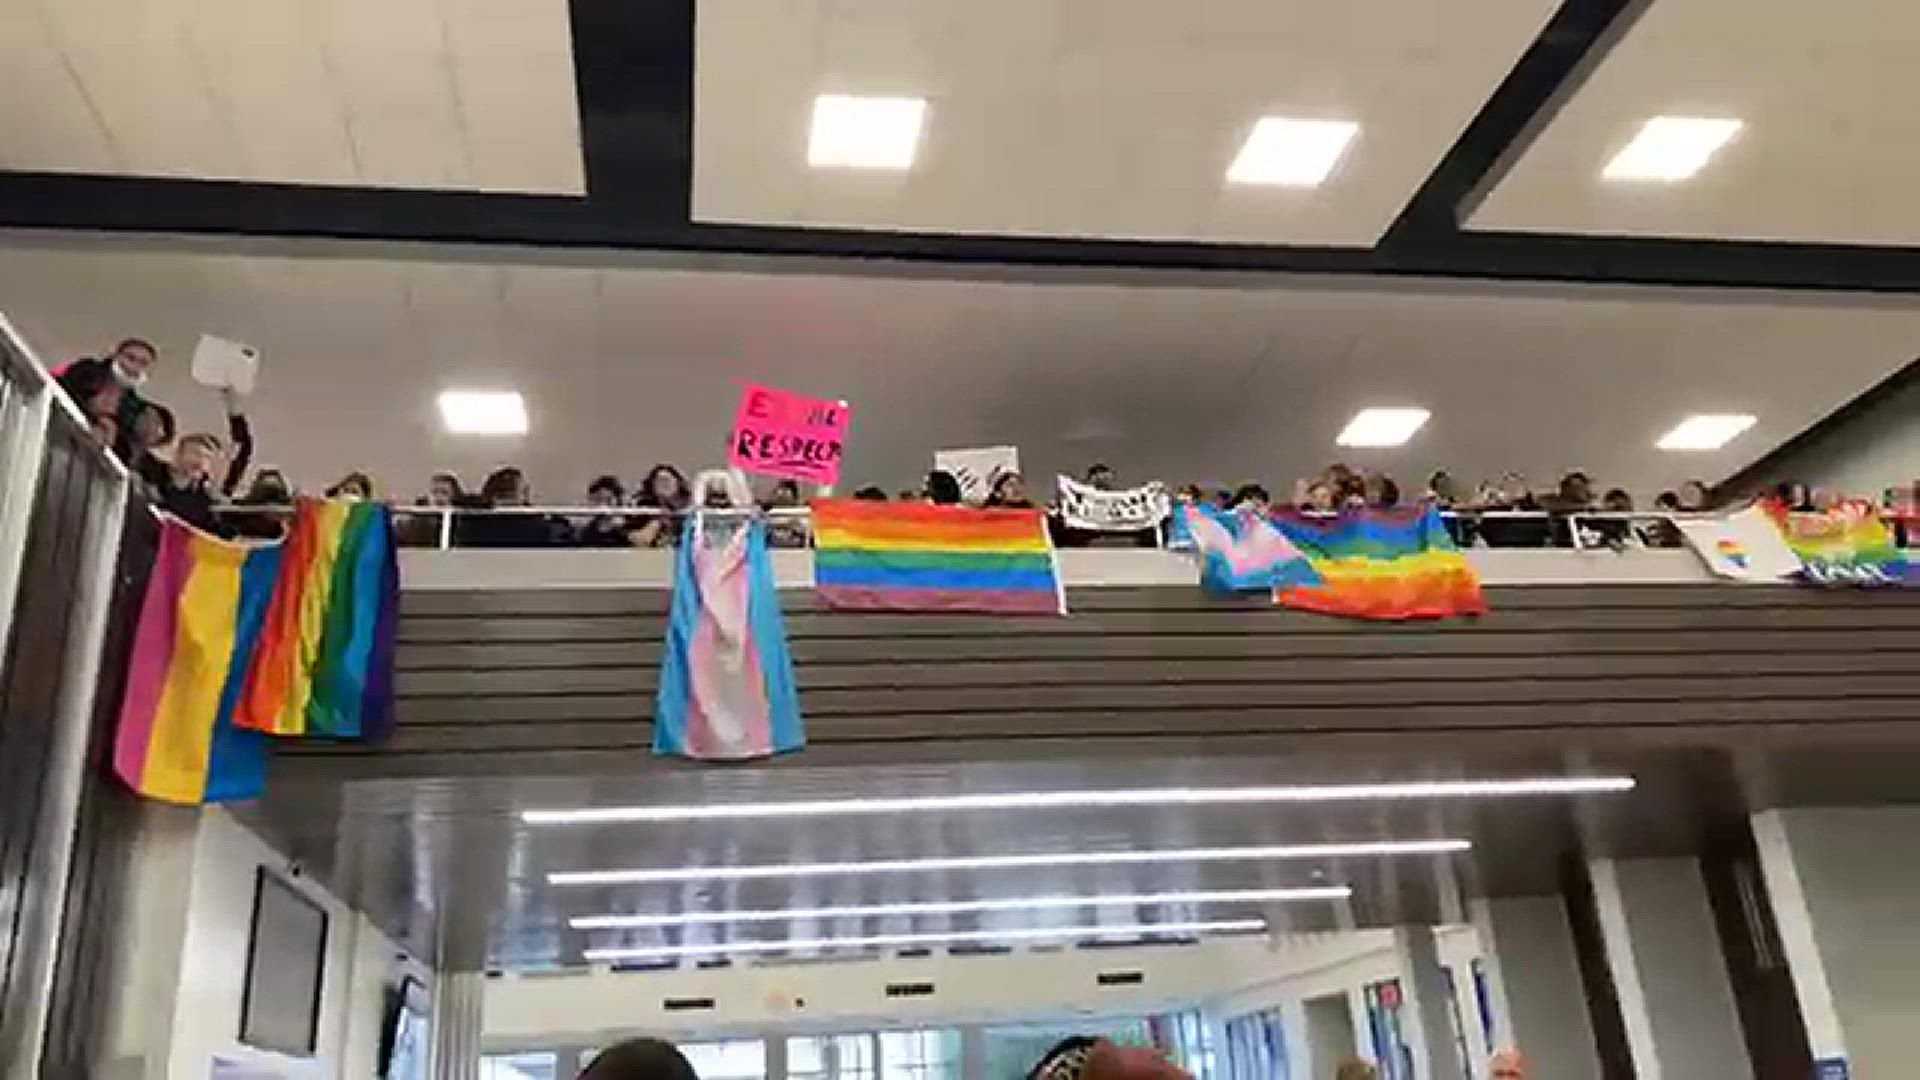 Video and pictures spread over social media depicting students protesting inside and outside of the school.